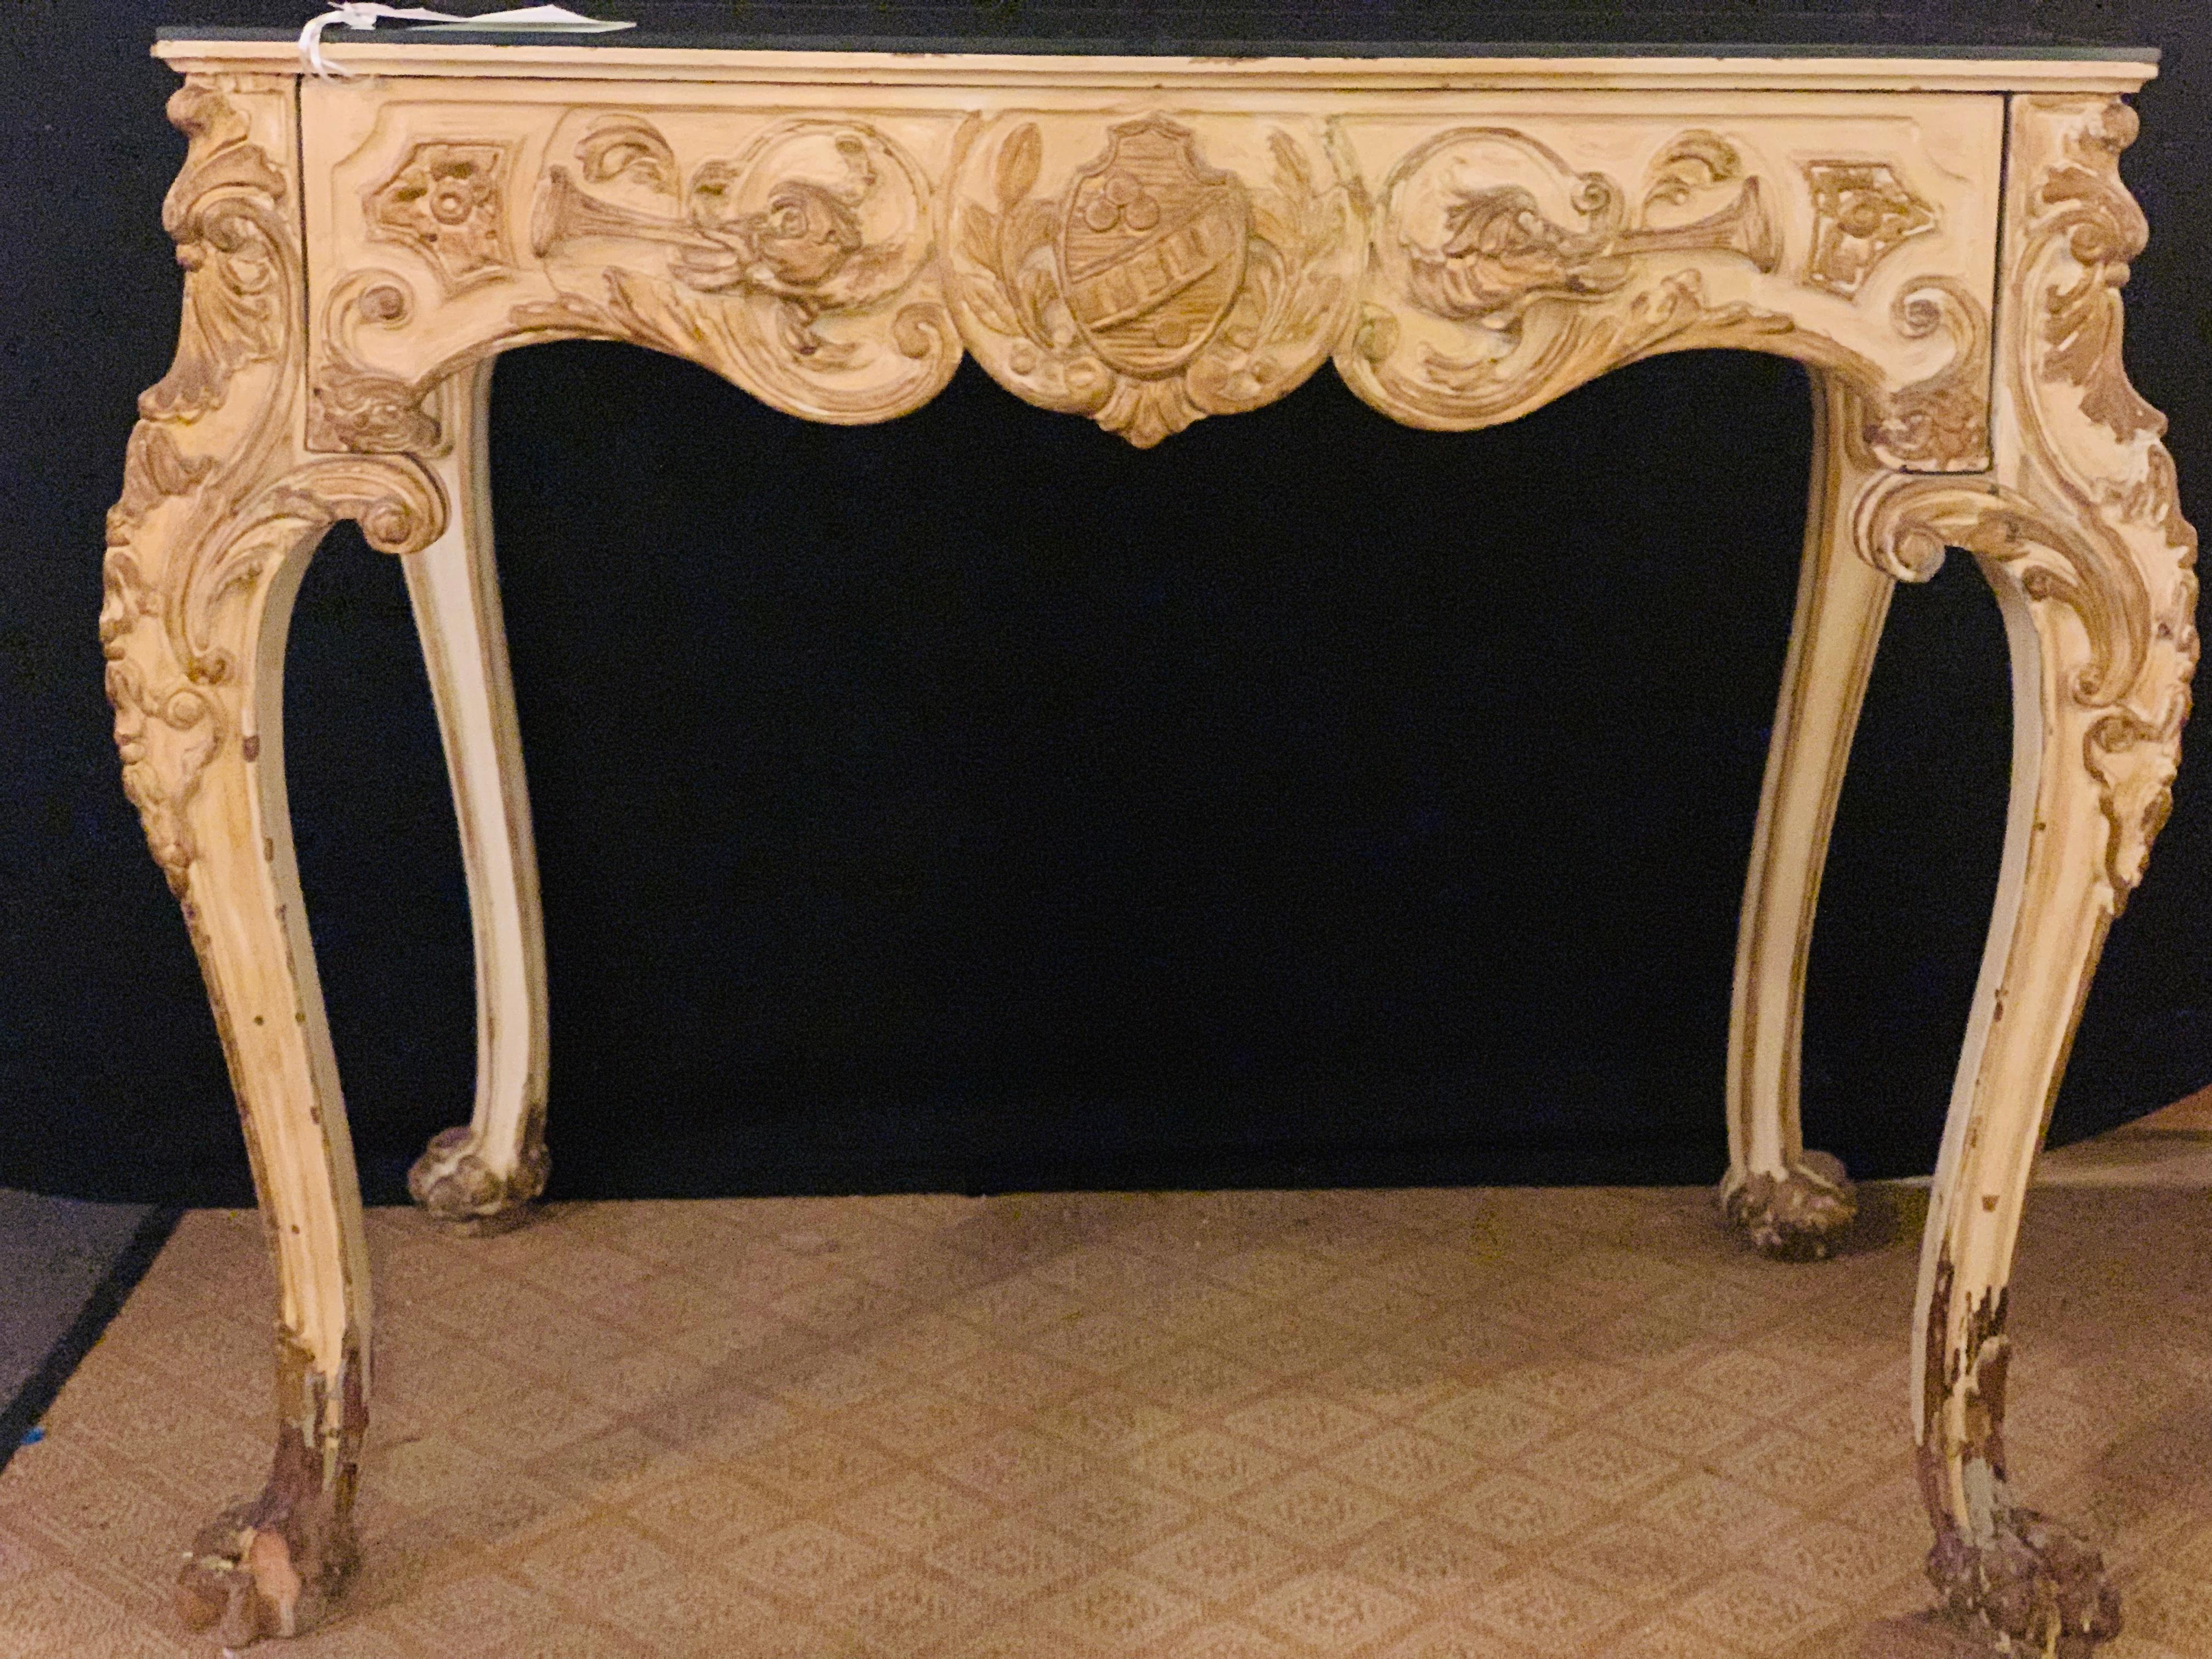 A finely carved late 19th early 20th century Hollywood Regency white and parcel-gilt decorated vanity by Jansen having a mirrored top and a single center drawer.